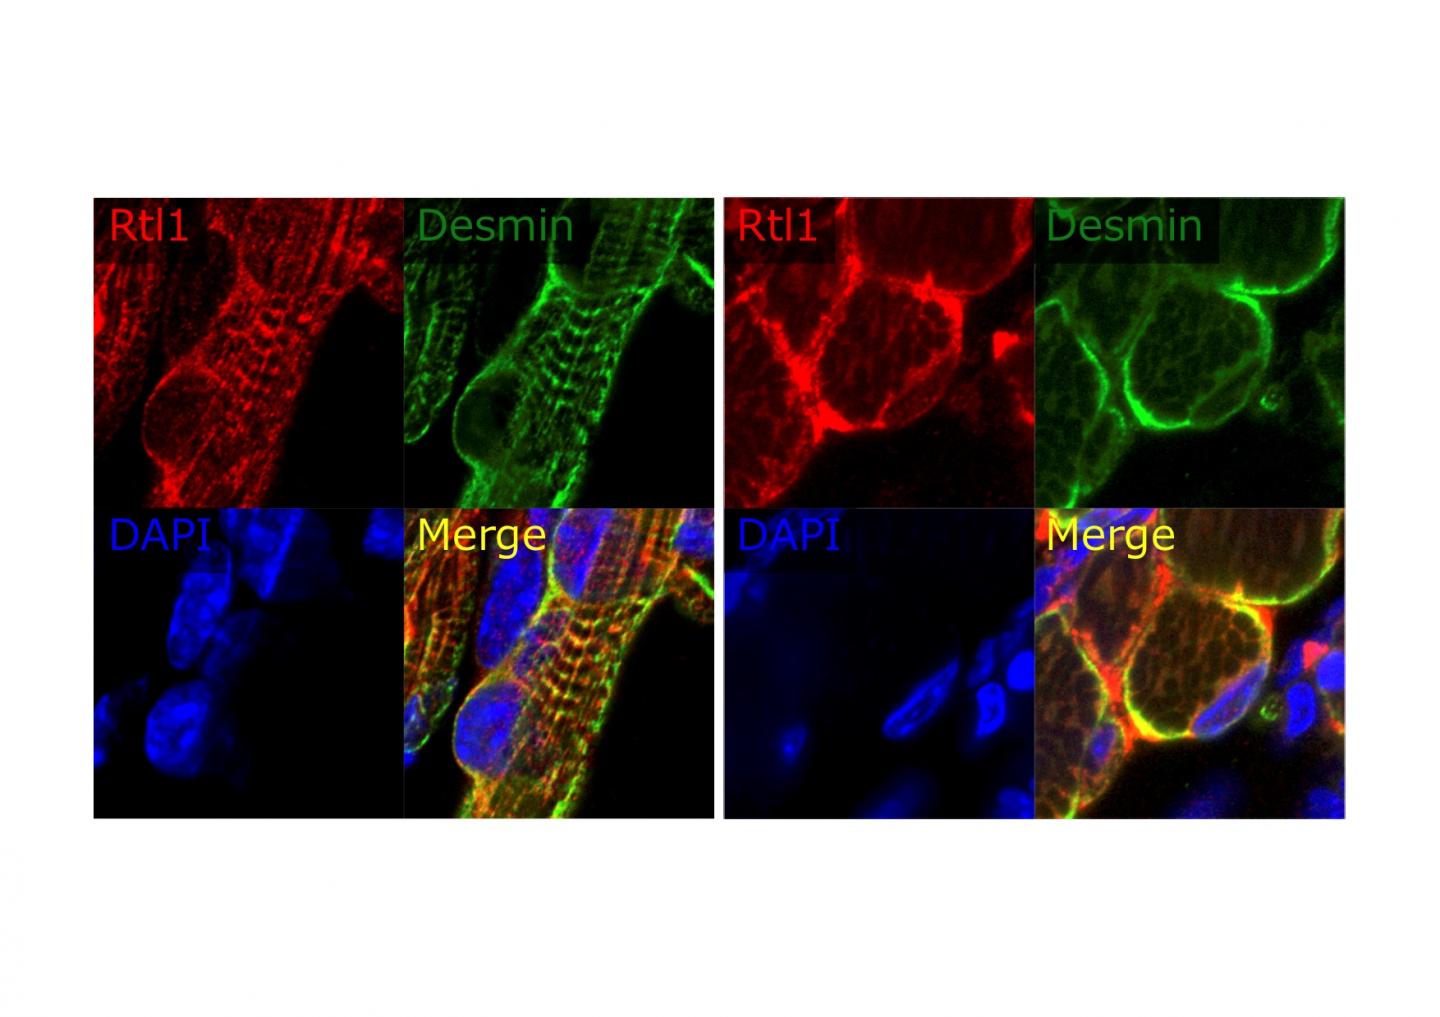 RTL1 Protein Is Co-Localized with DESMIN in Neonates